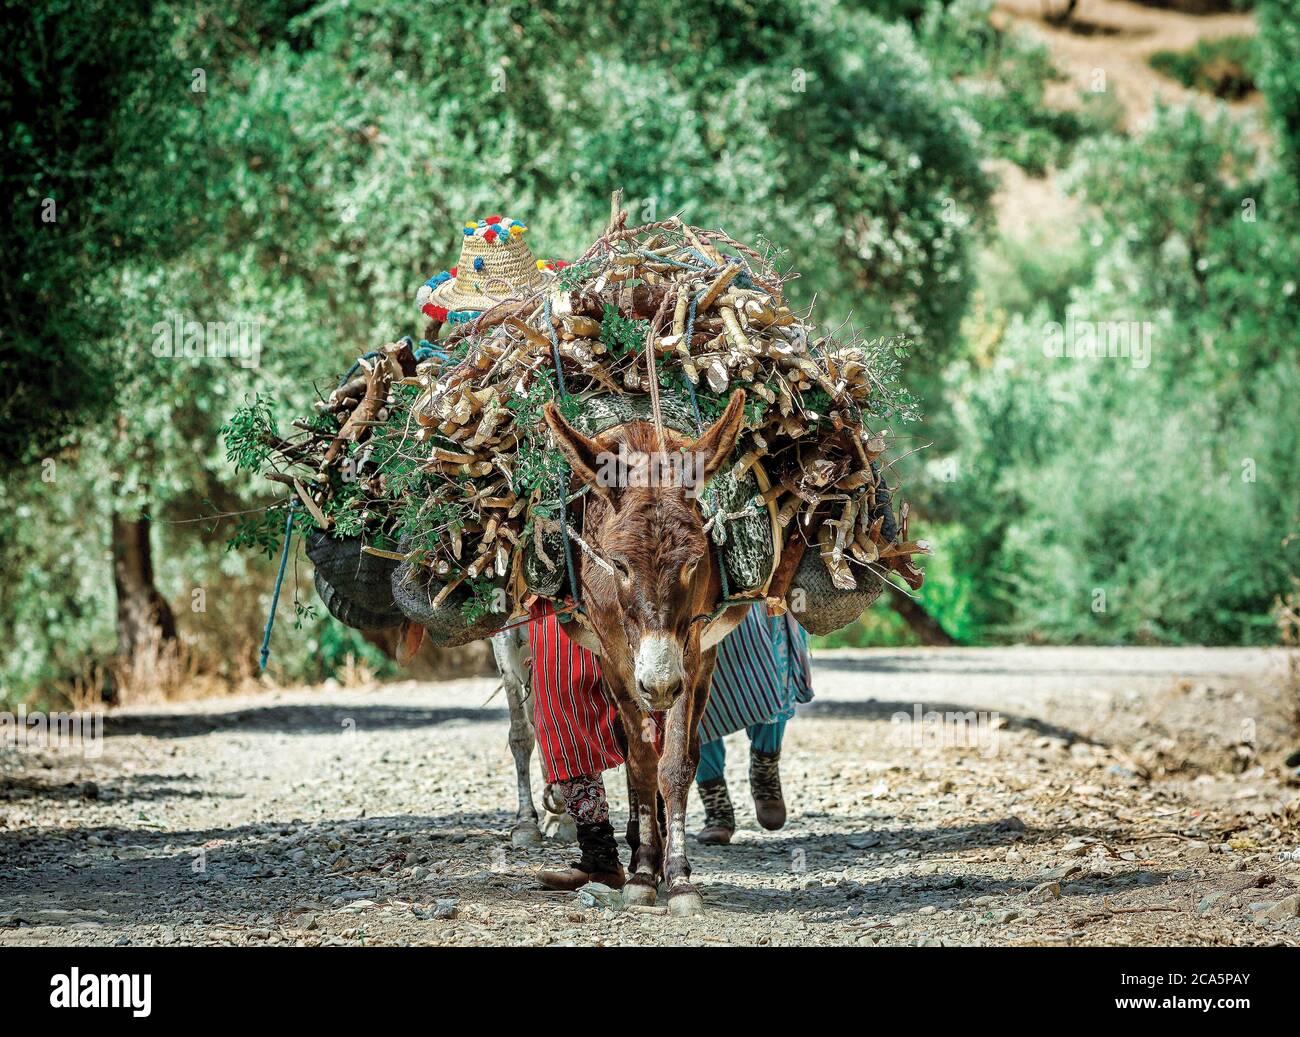 Morocco, Meknes, peasant women carrying wood on a donkey in the middle of nature on a path Stock Photo